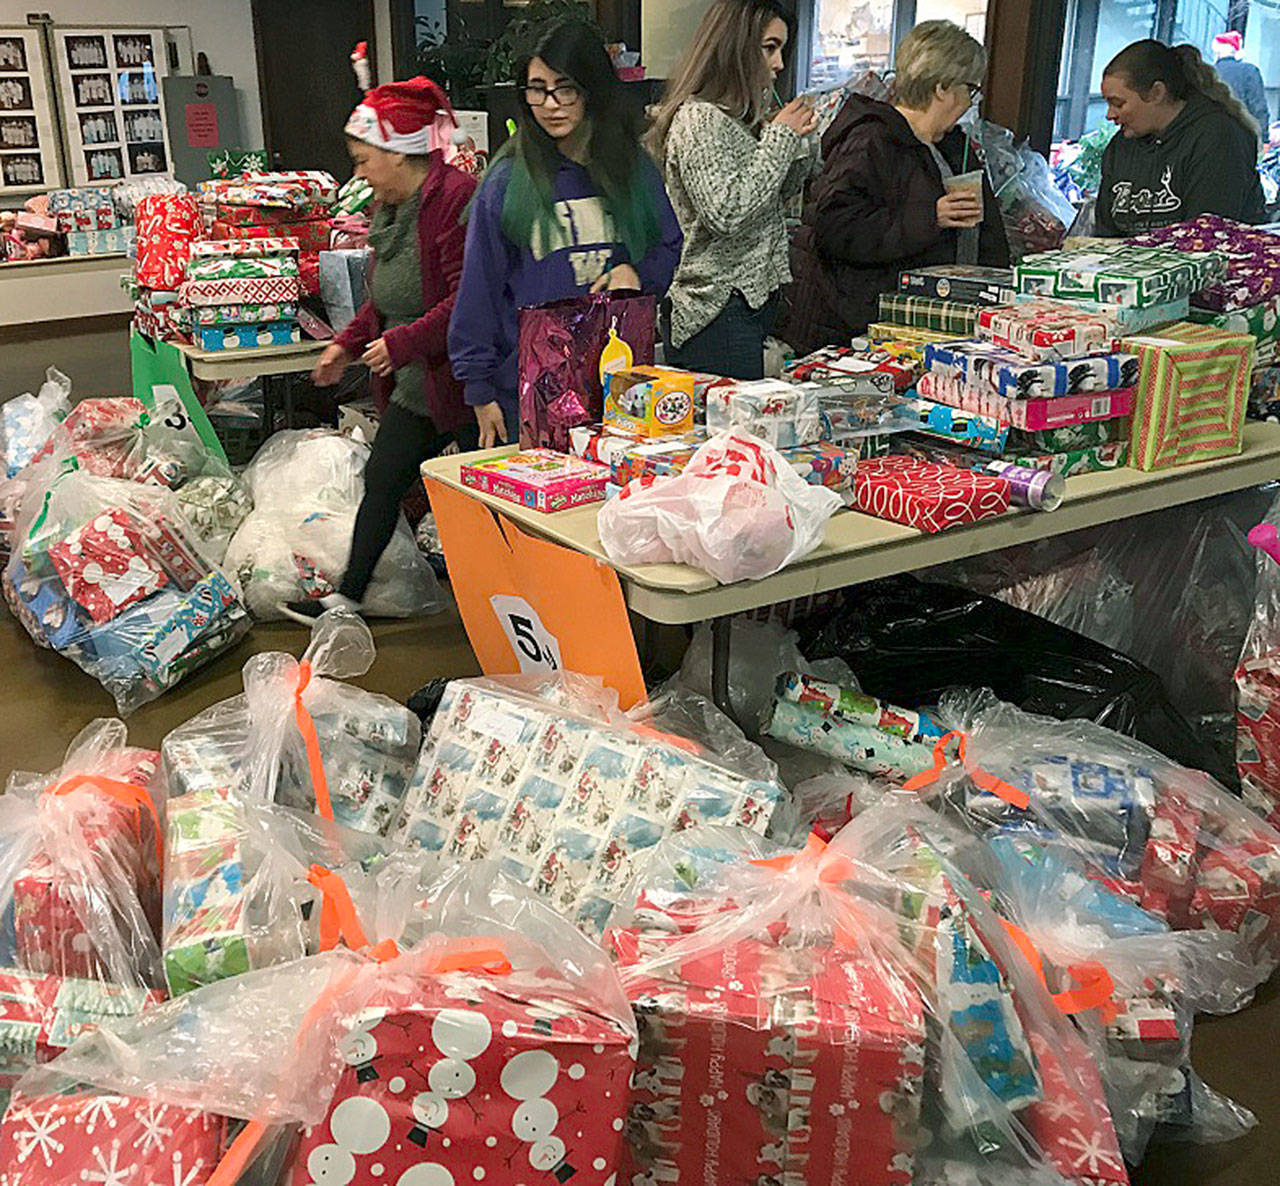 Volunteers organize gifts as part of the annual Toys for Joy program. COURTESY PHOTO, Puget Sound Fire